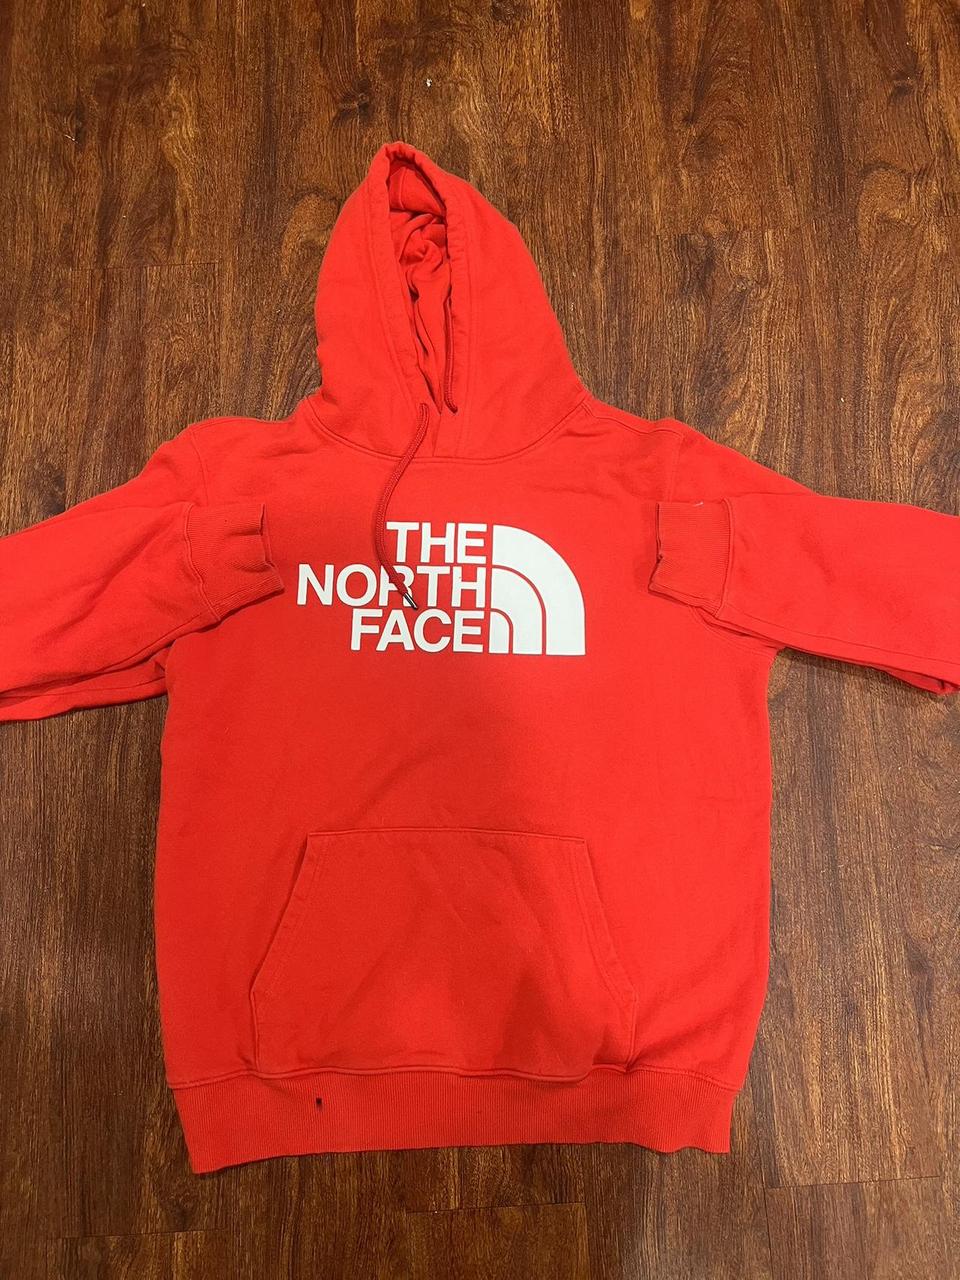 The North Face Red Hoodie Size Large -Only flaw is... - Depop